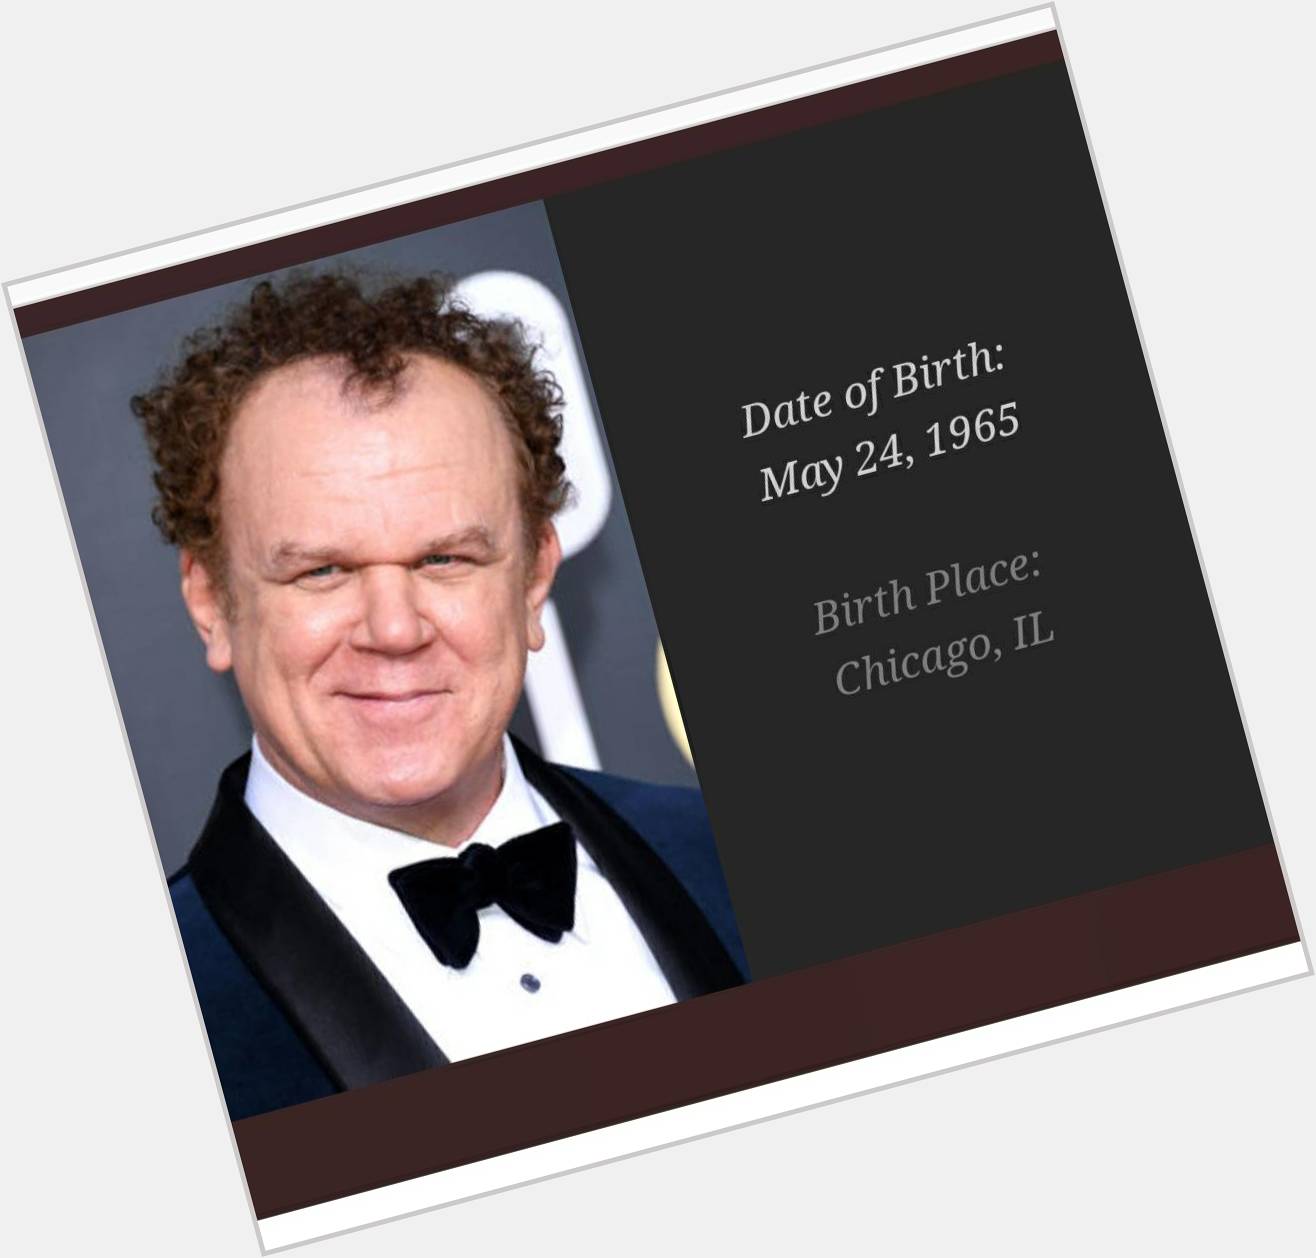 Happy Birthday, Friend of the ShowTM, John C. Reilly!
Check out S2, Ep 10Q for our appreciation pod. 